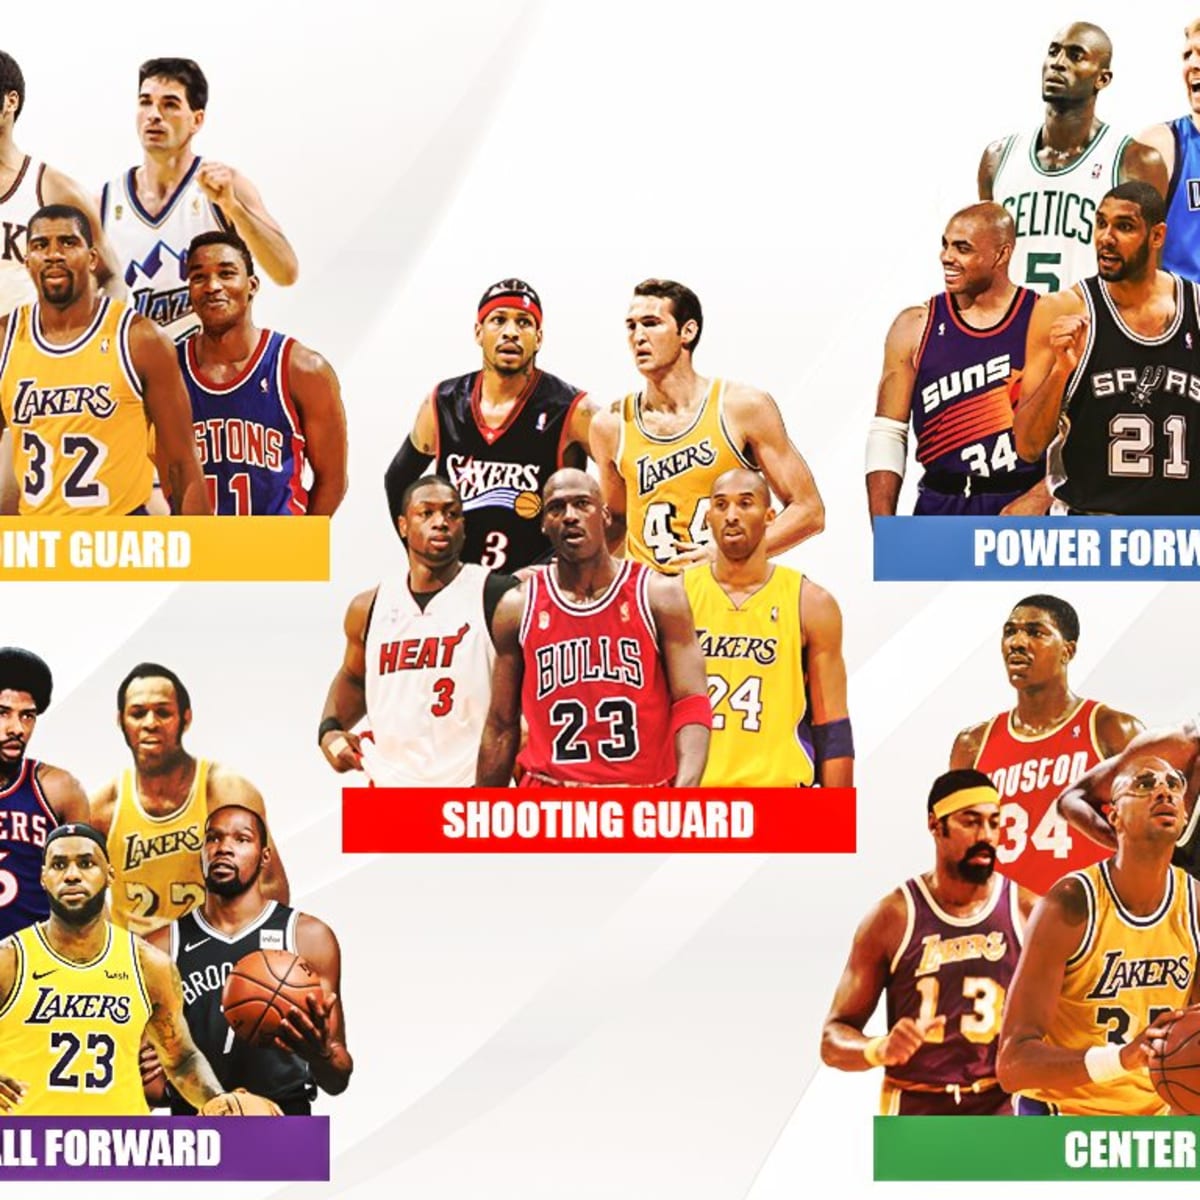 The Top 21: Experts Pick the Greatest Player of All Time